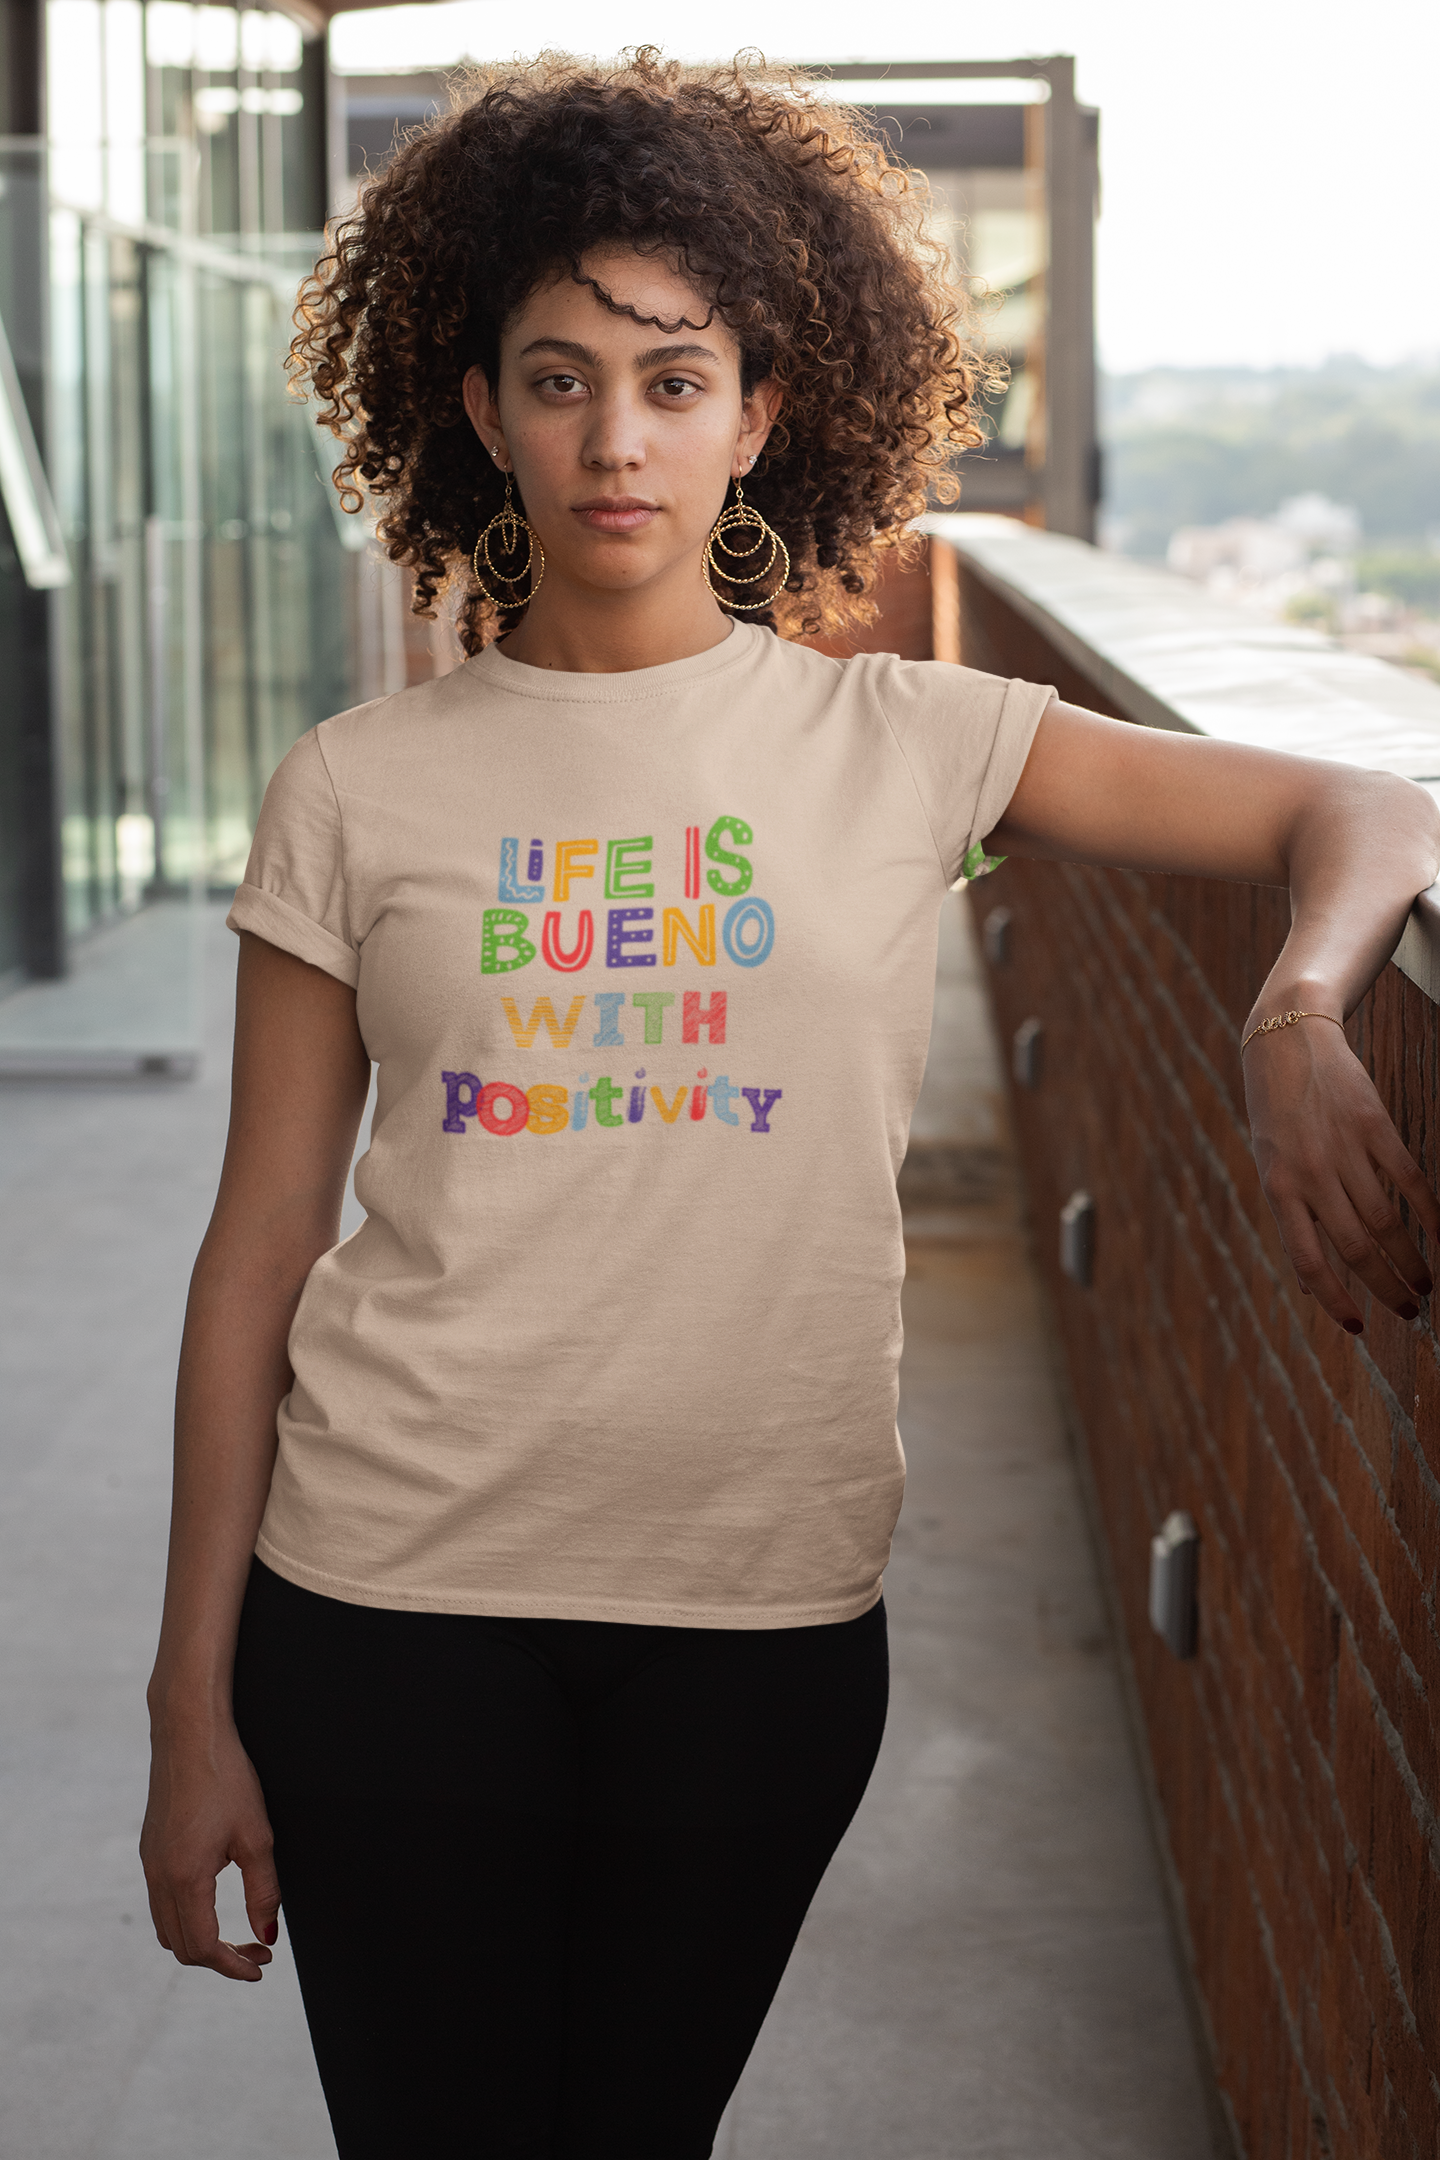 LIfe is Bueno wit Positivity t-shirt